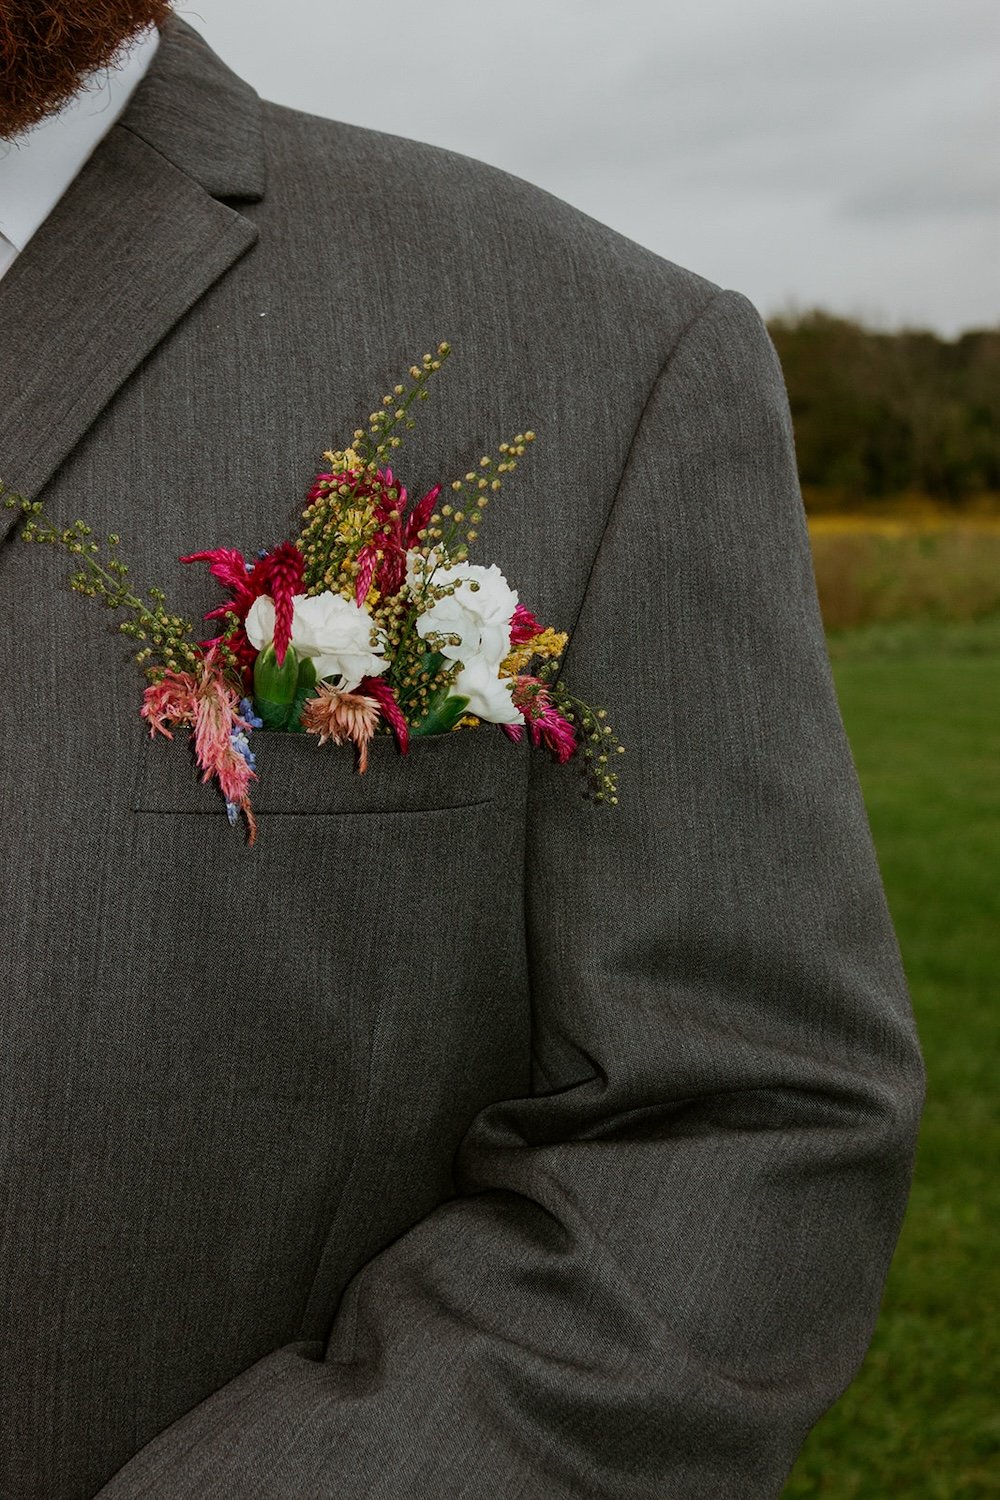 The grooms colorful boutineer dressed with fuchsia, pink and white florals.